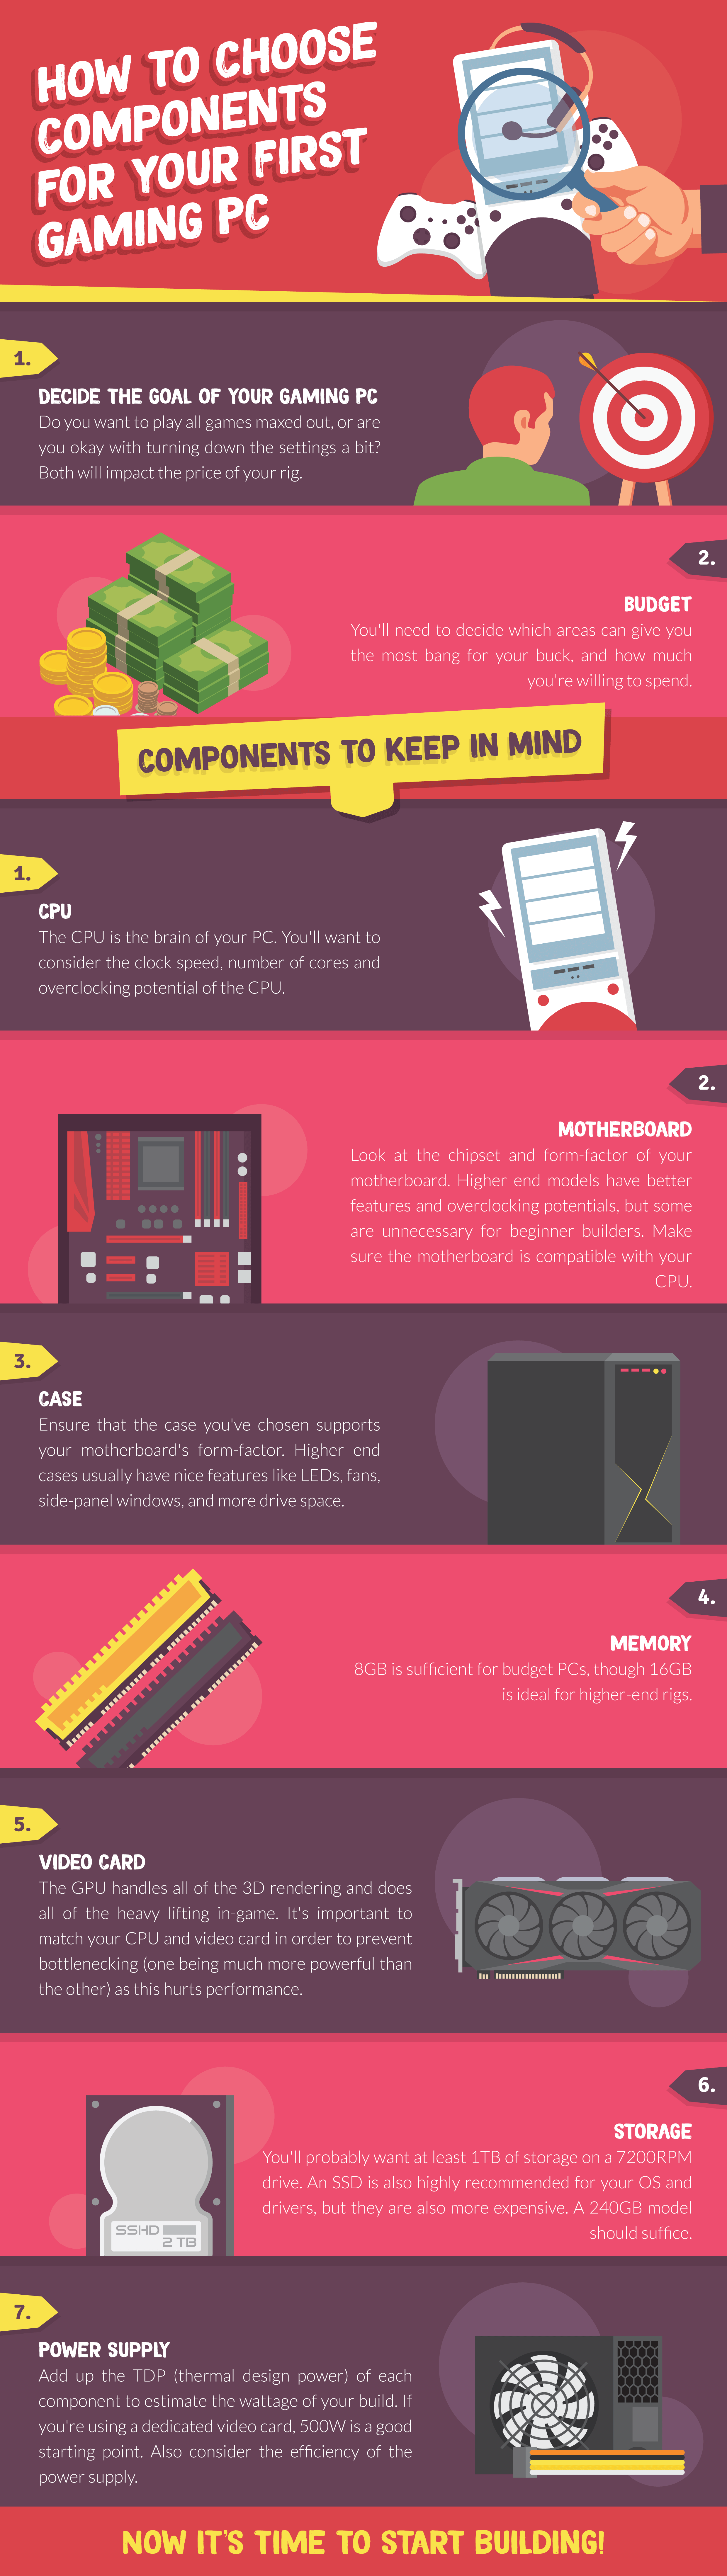 first-gaming-pc-infographic